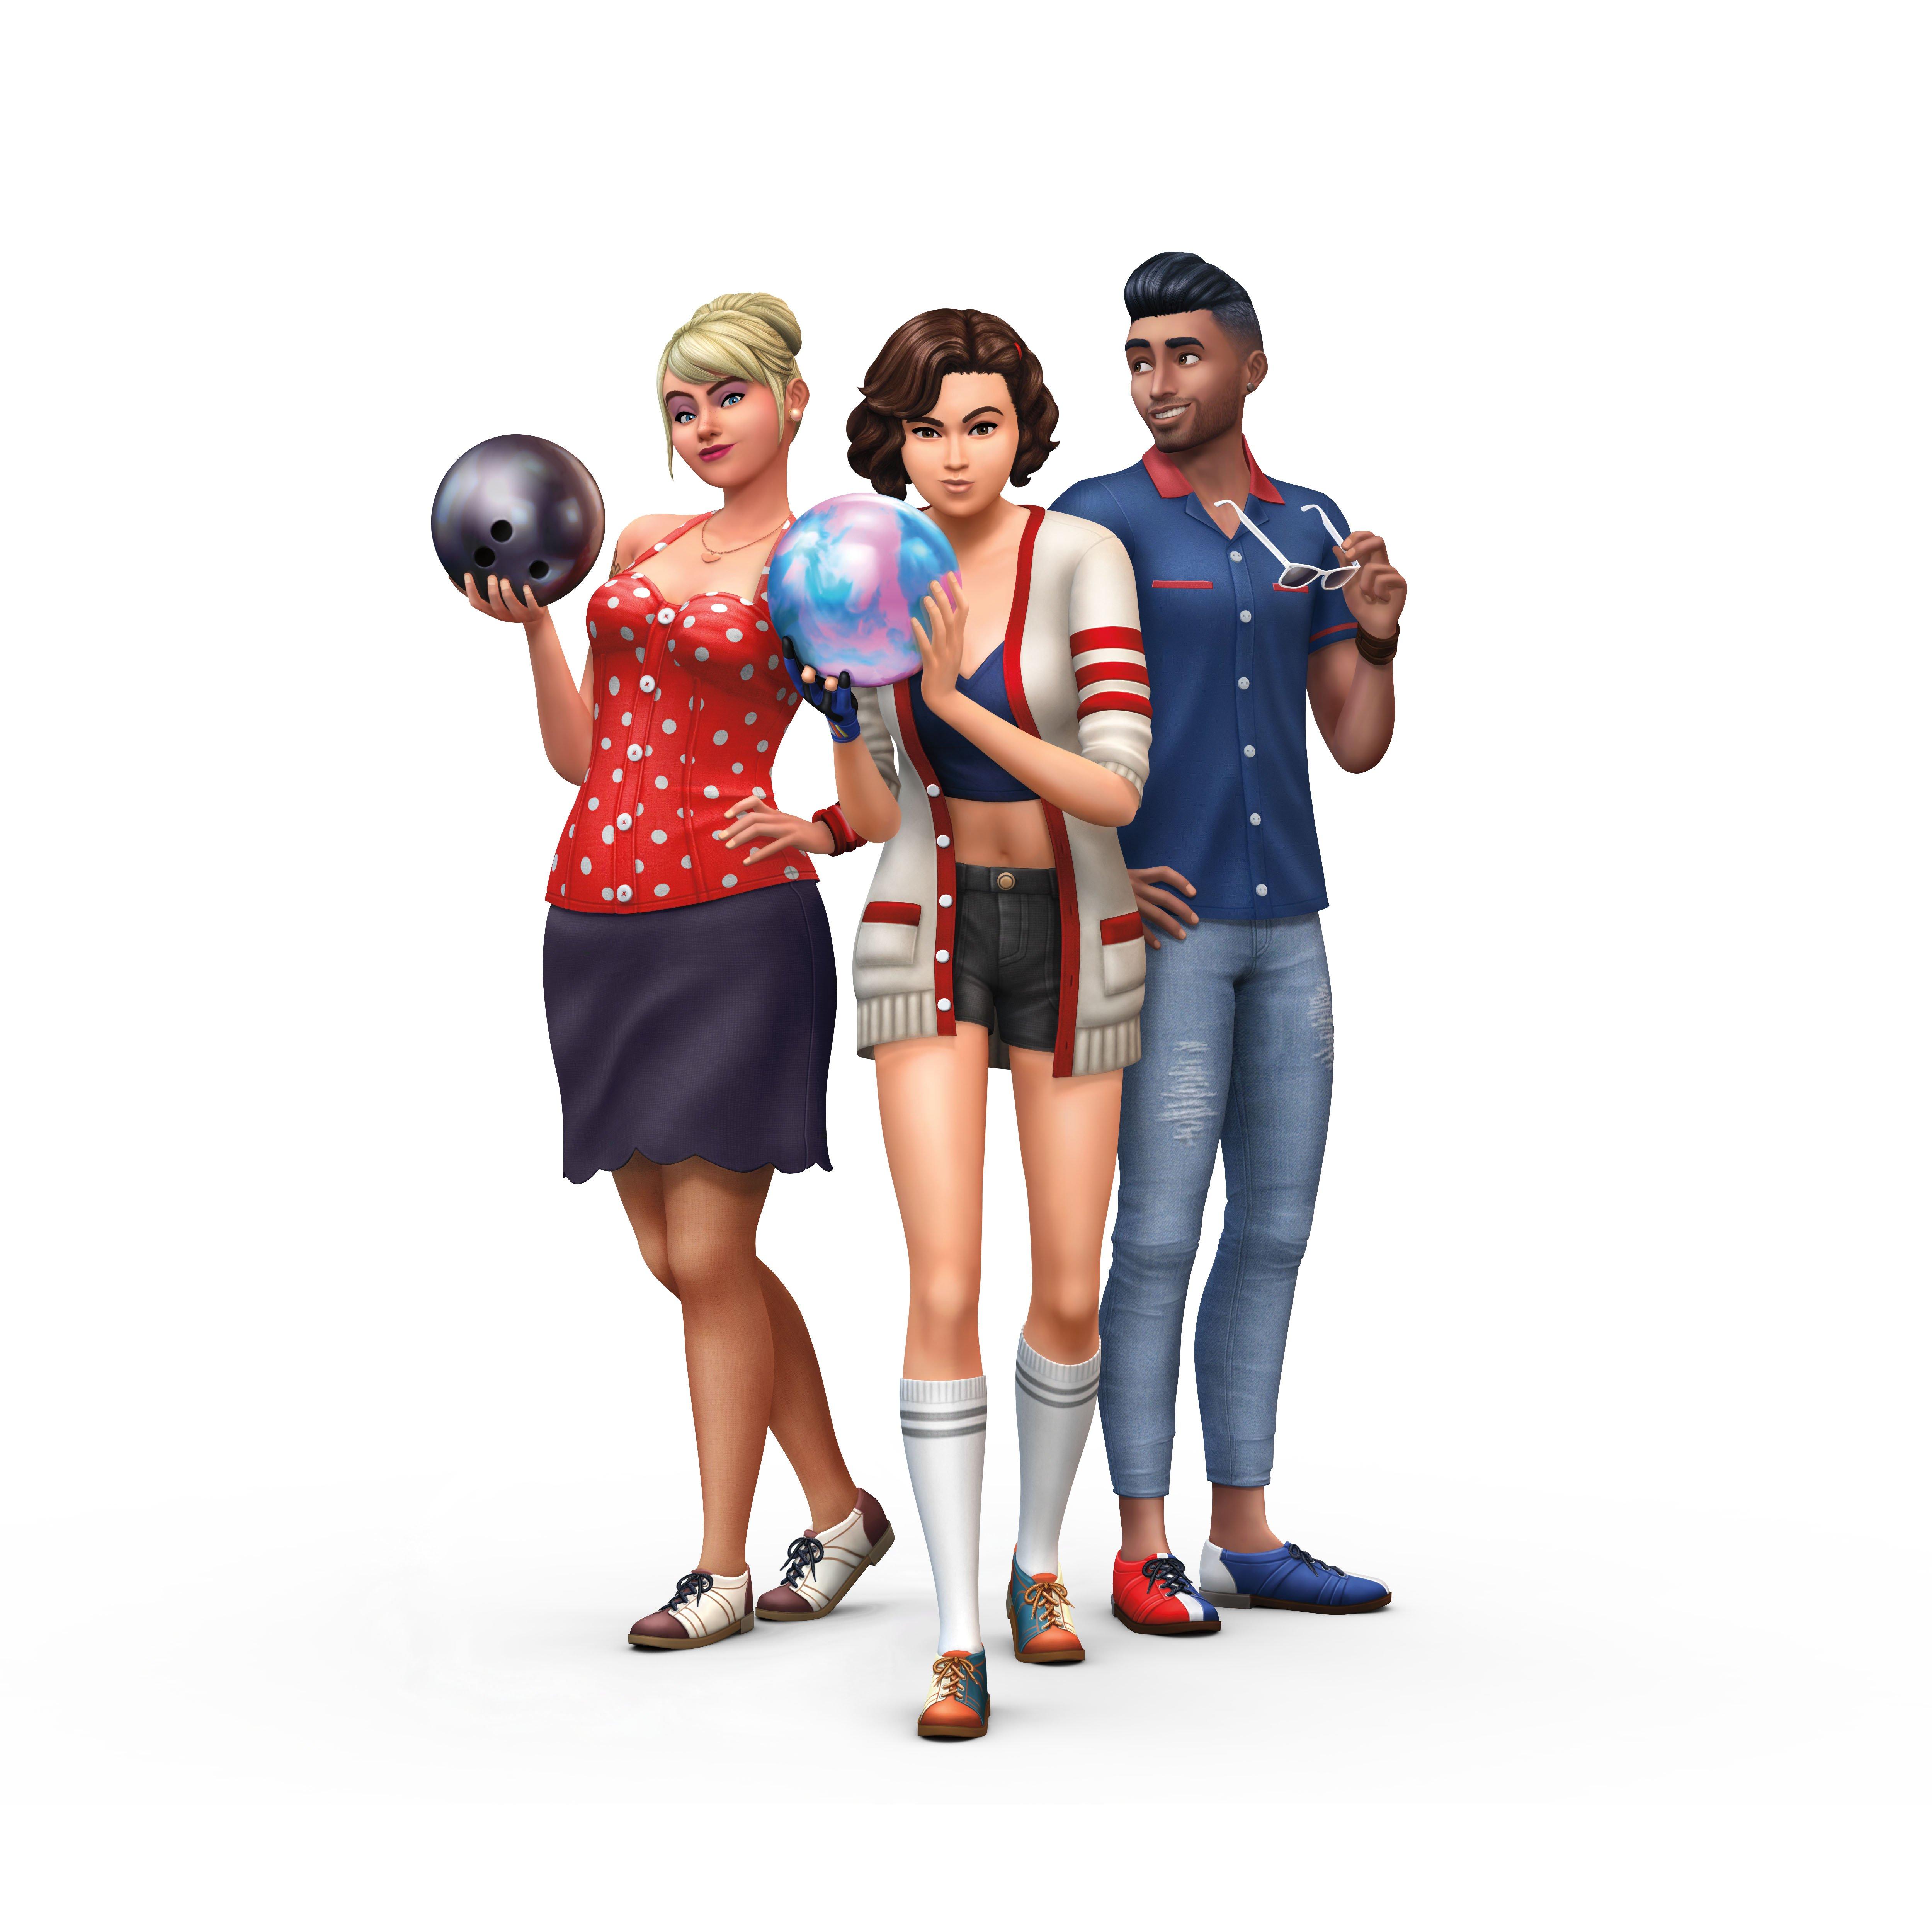 Develop End table Darken The Sims 4: Bowling Night Stuff Pack